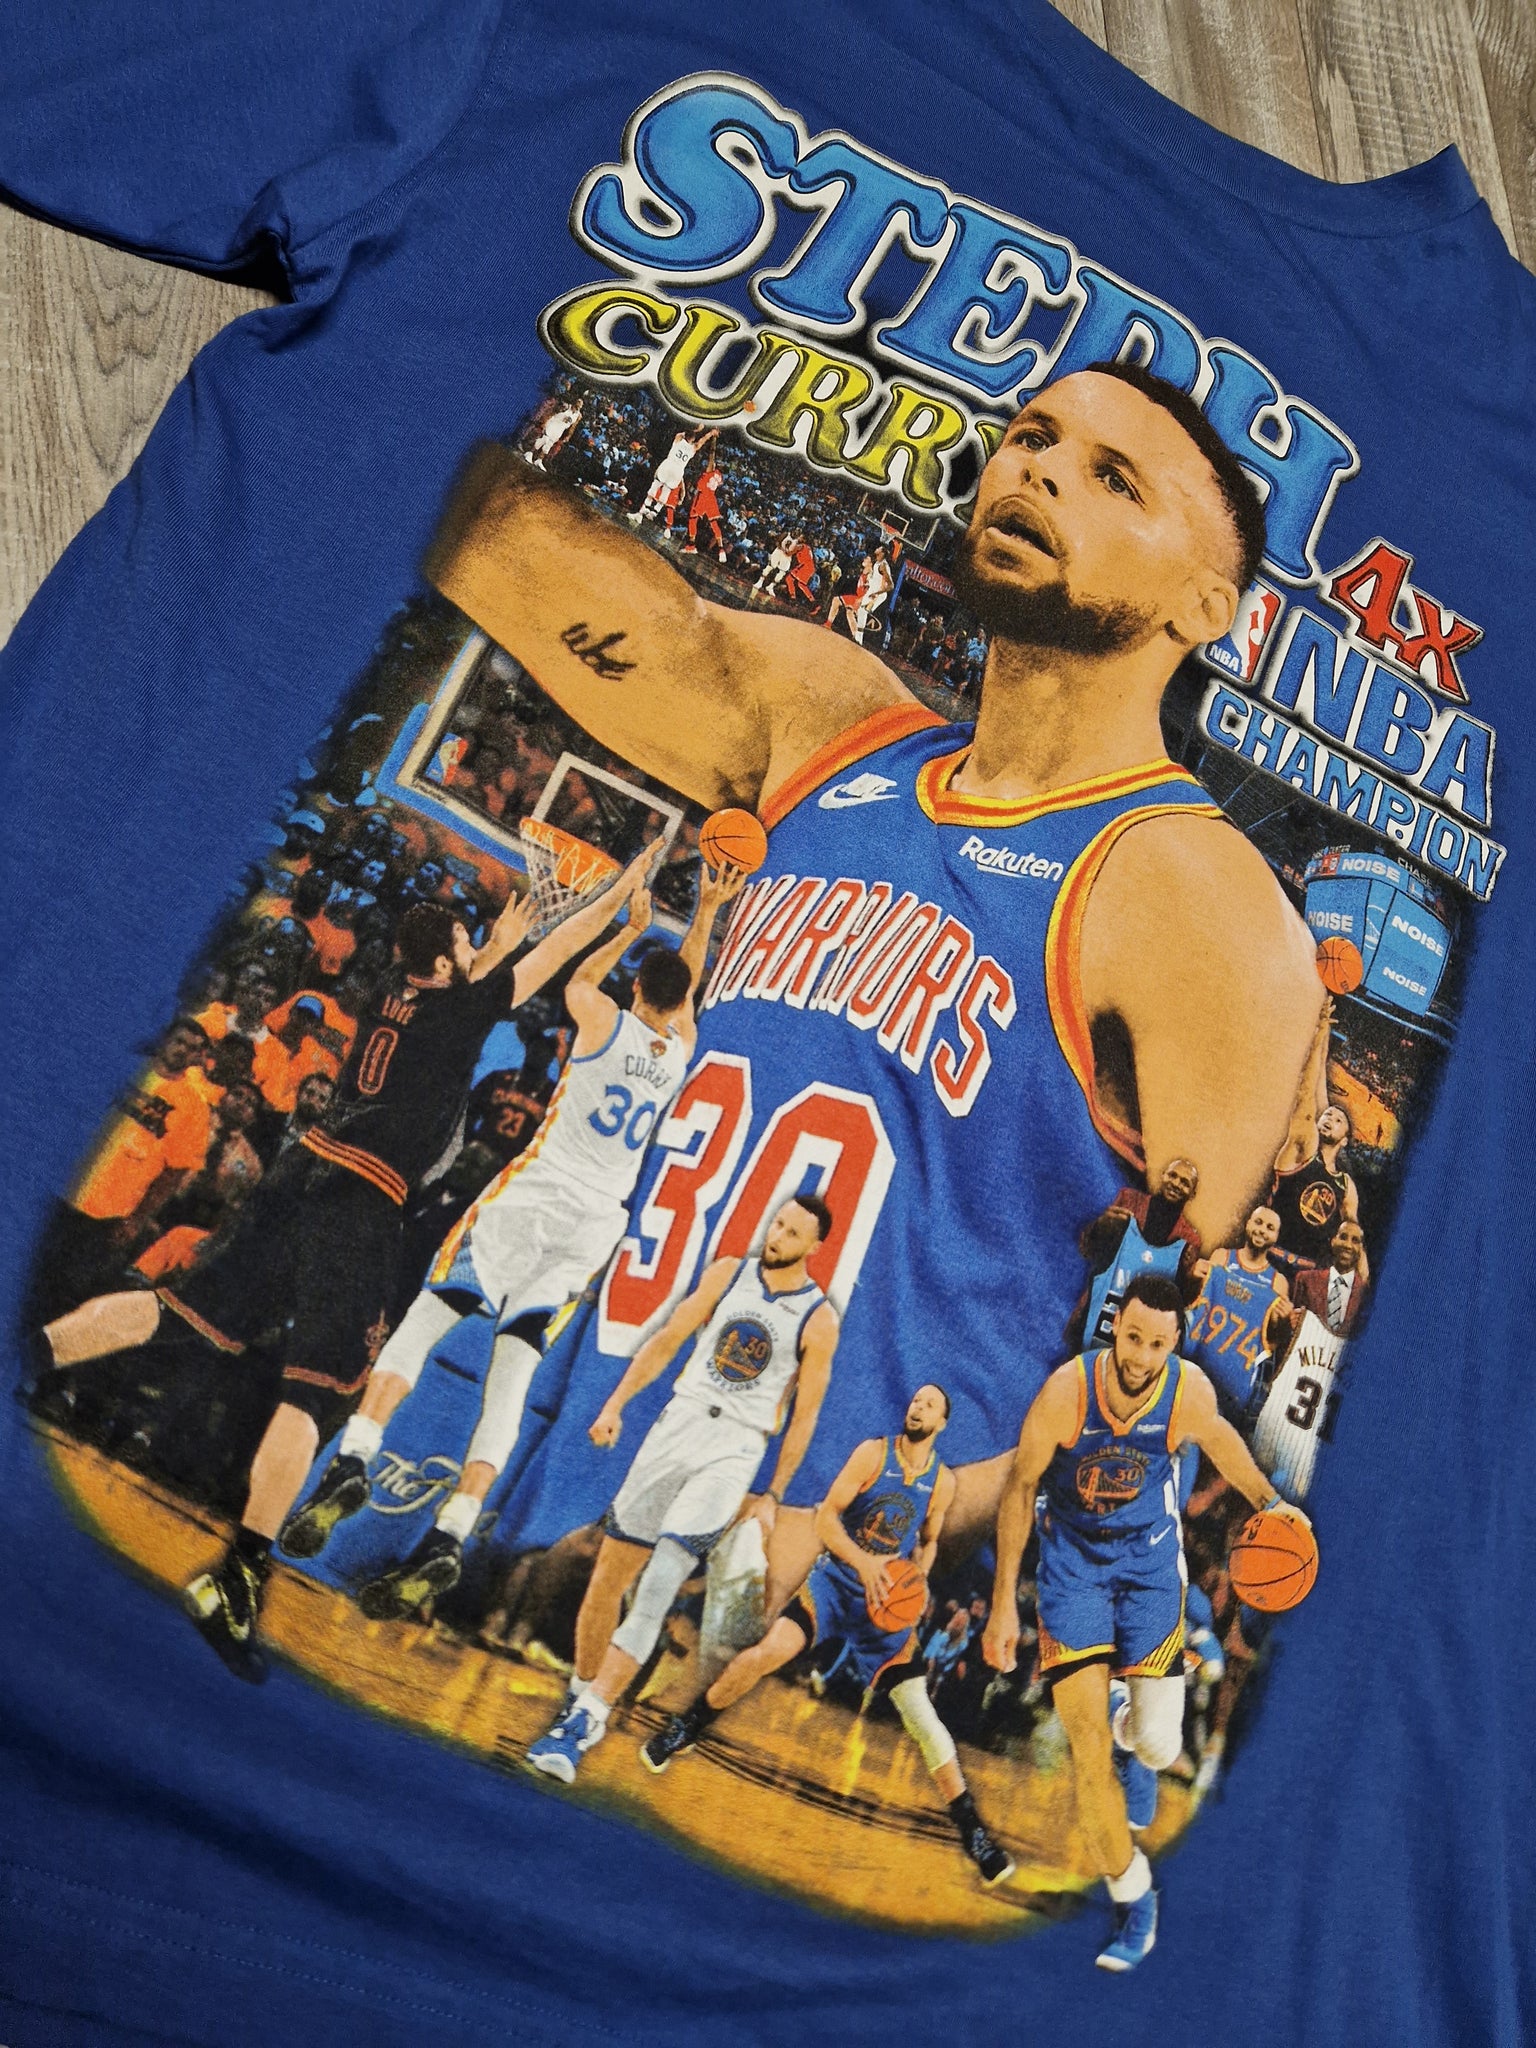 🏀 Steph Curry Marino Morwood T-Shirt Size Large – The